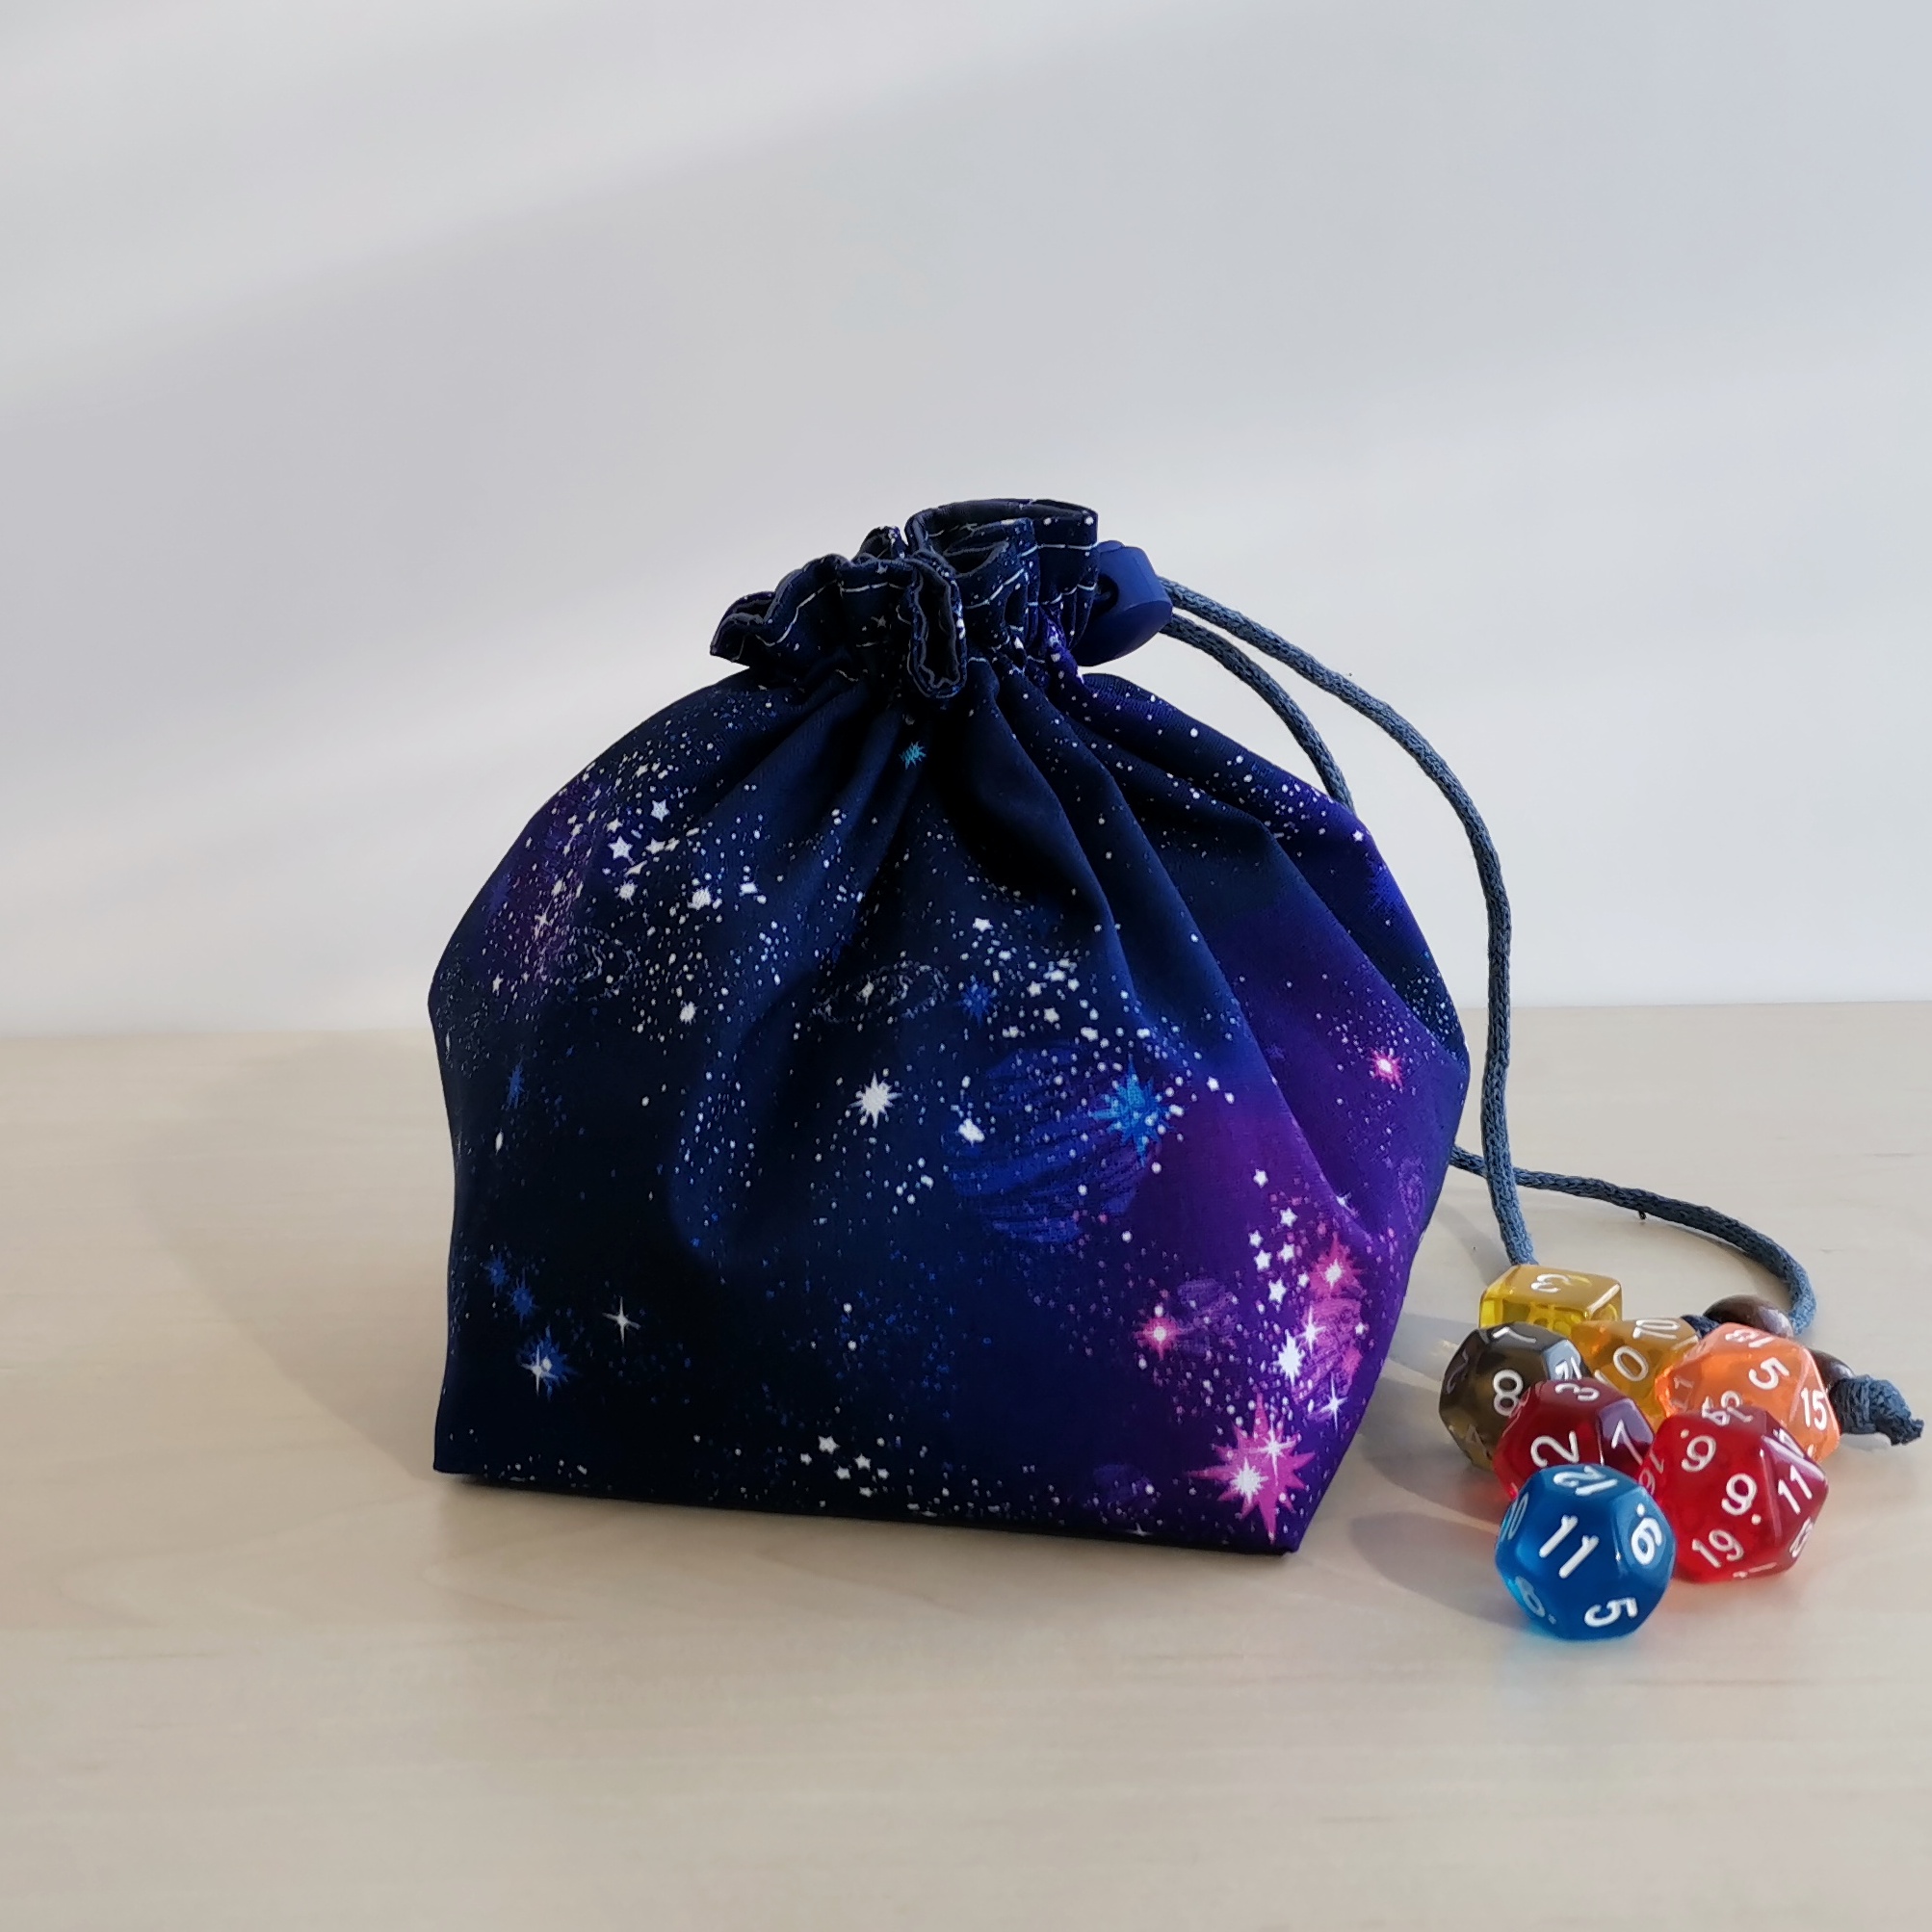 Large dice bag with pockets for 150-200 dice. Cotton fabric with galaxy print